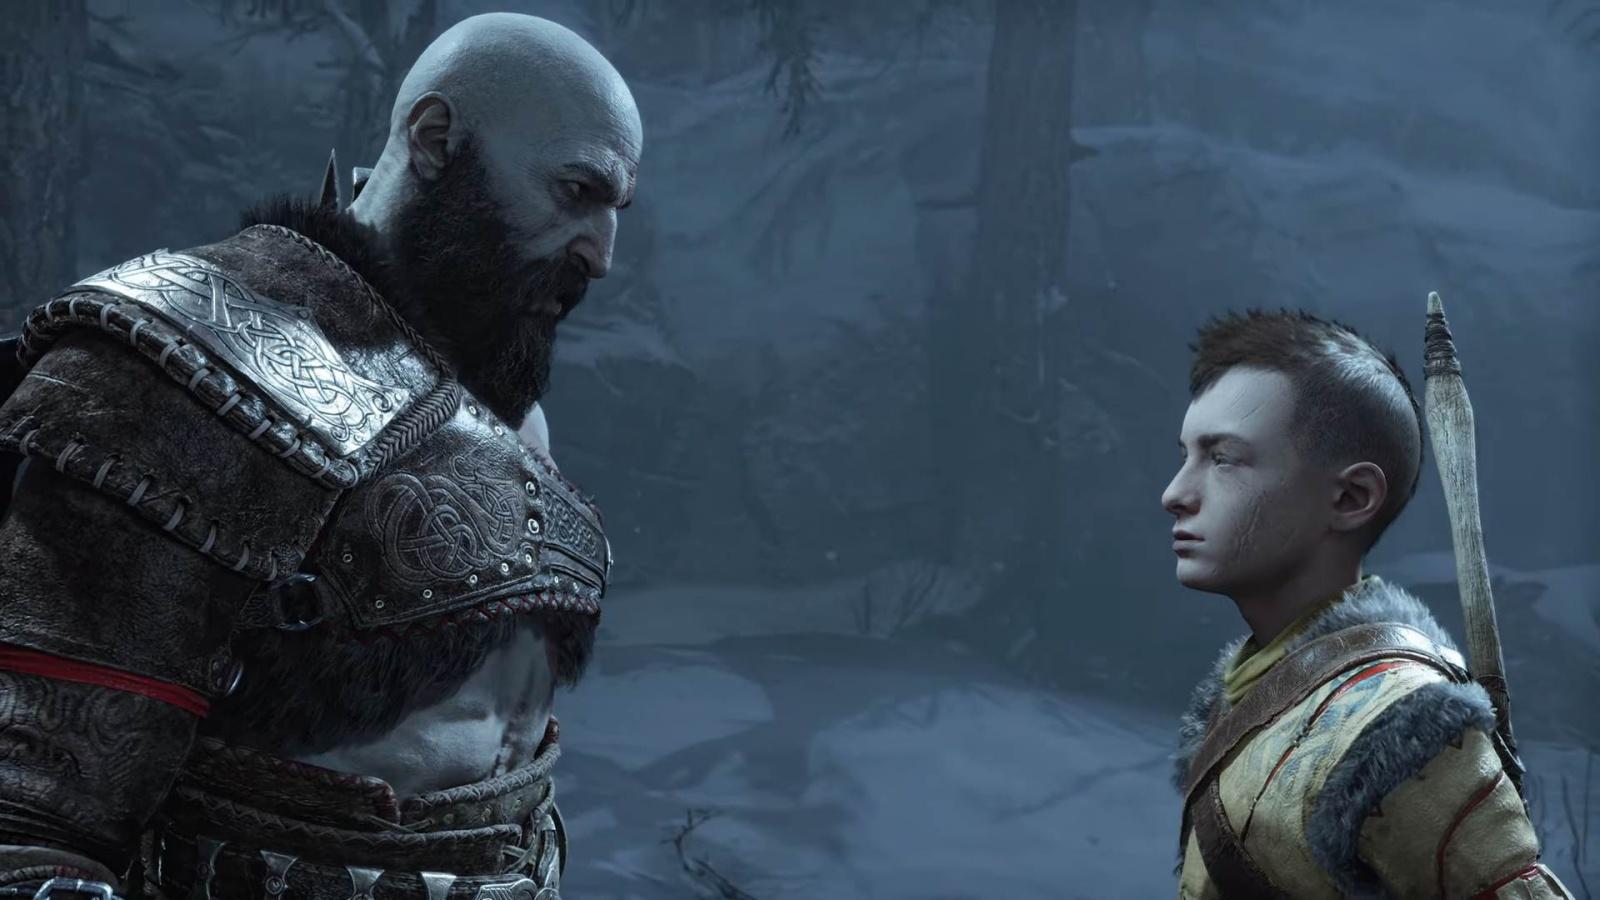 Call of Duty developers raging after Kratos actor Christopher